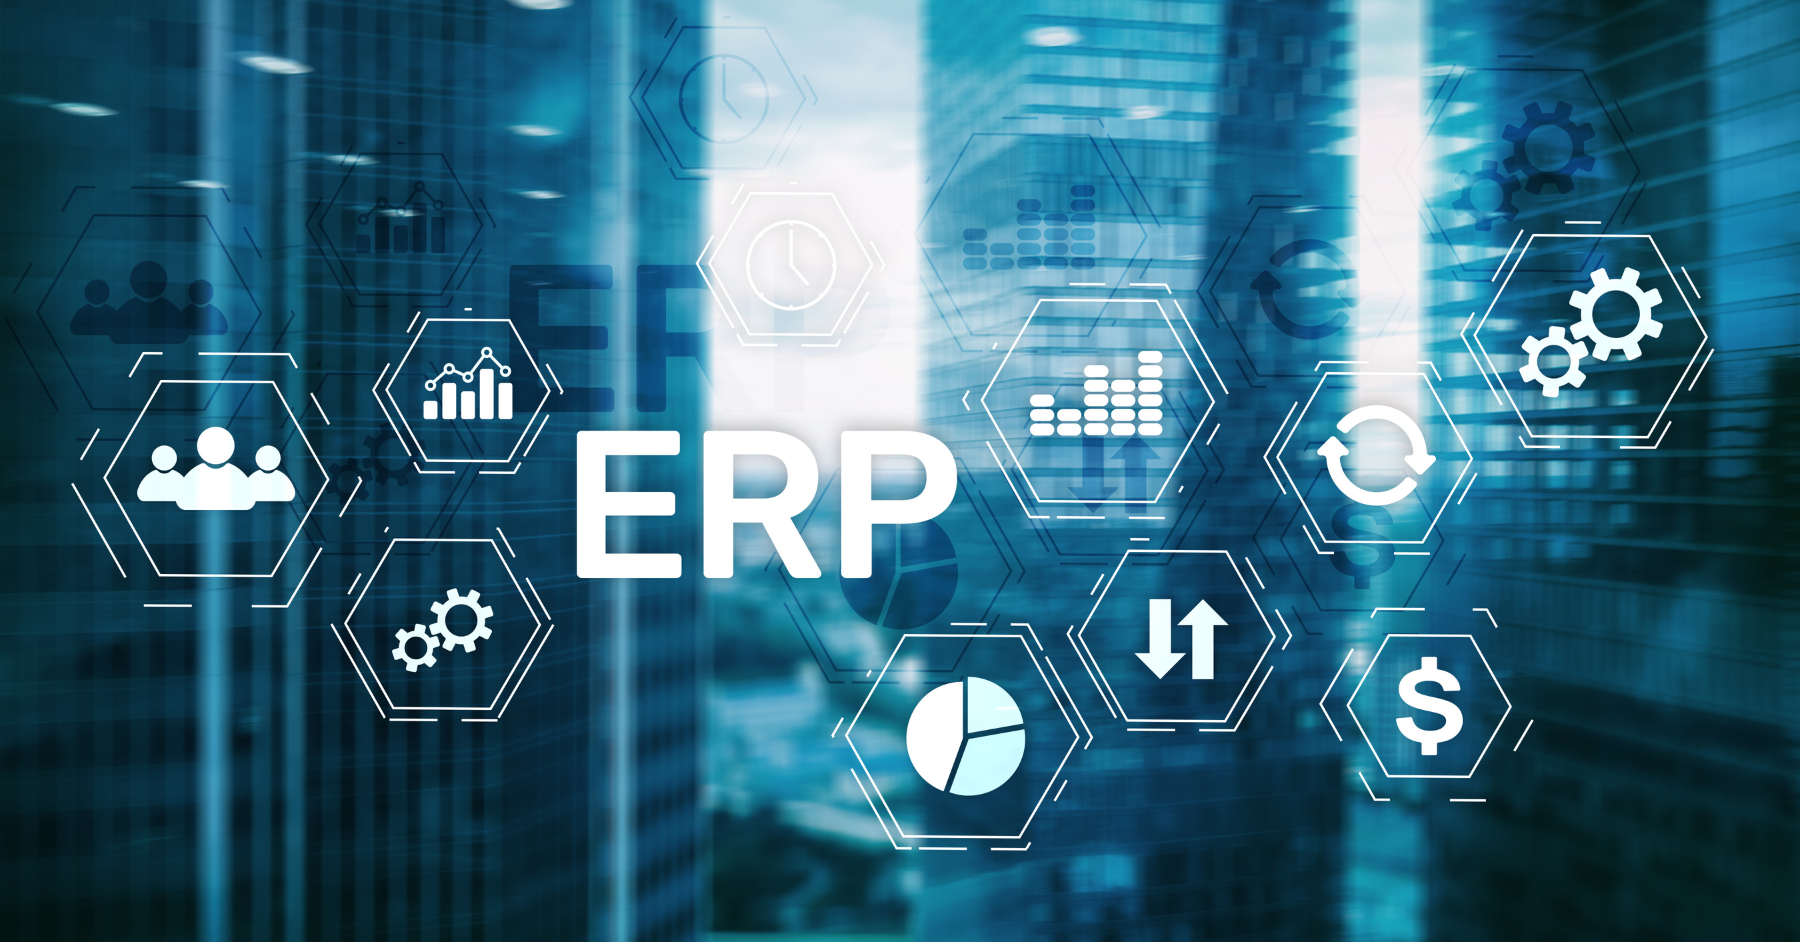 ERP Implementation: Why Organizations Should Consider External Support